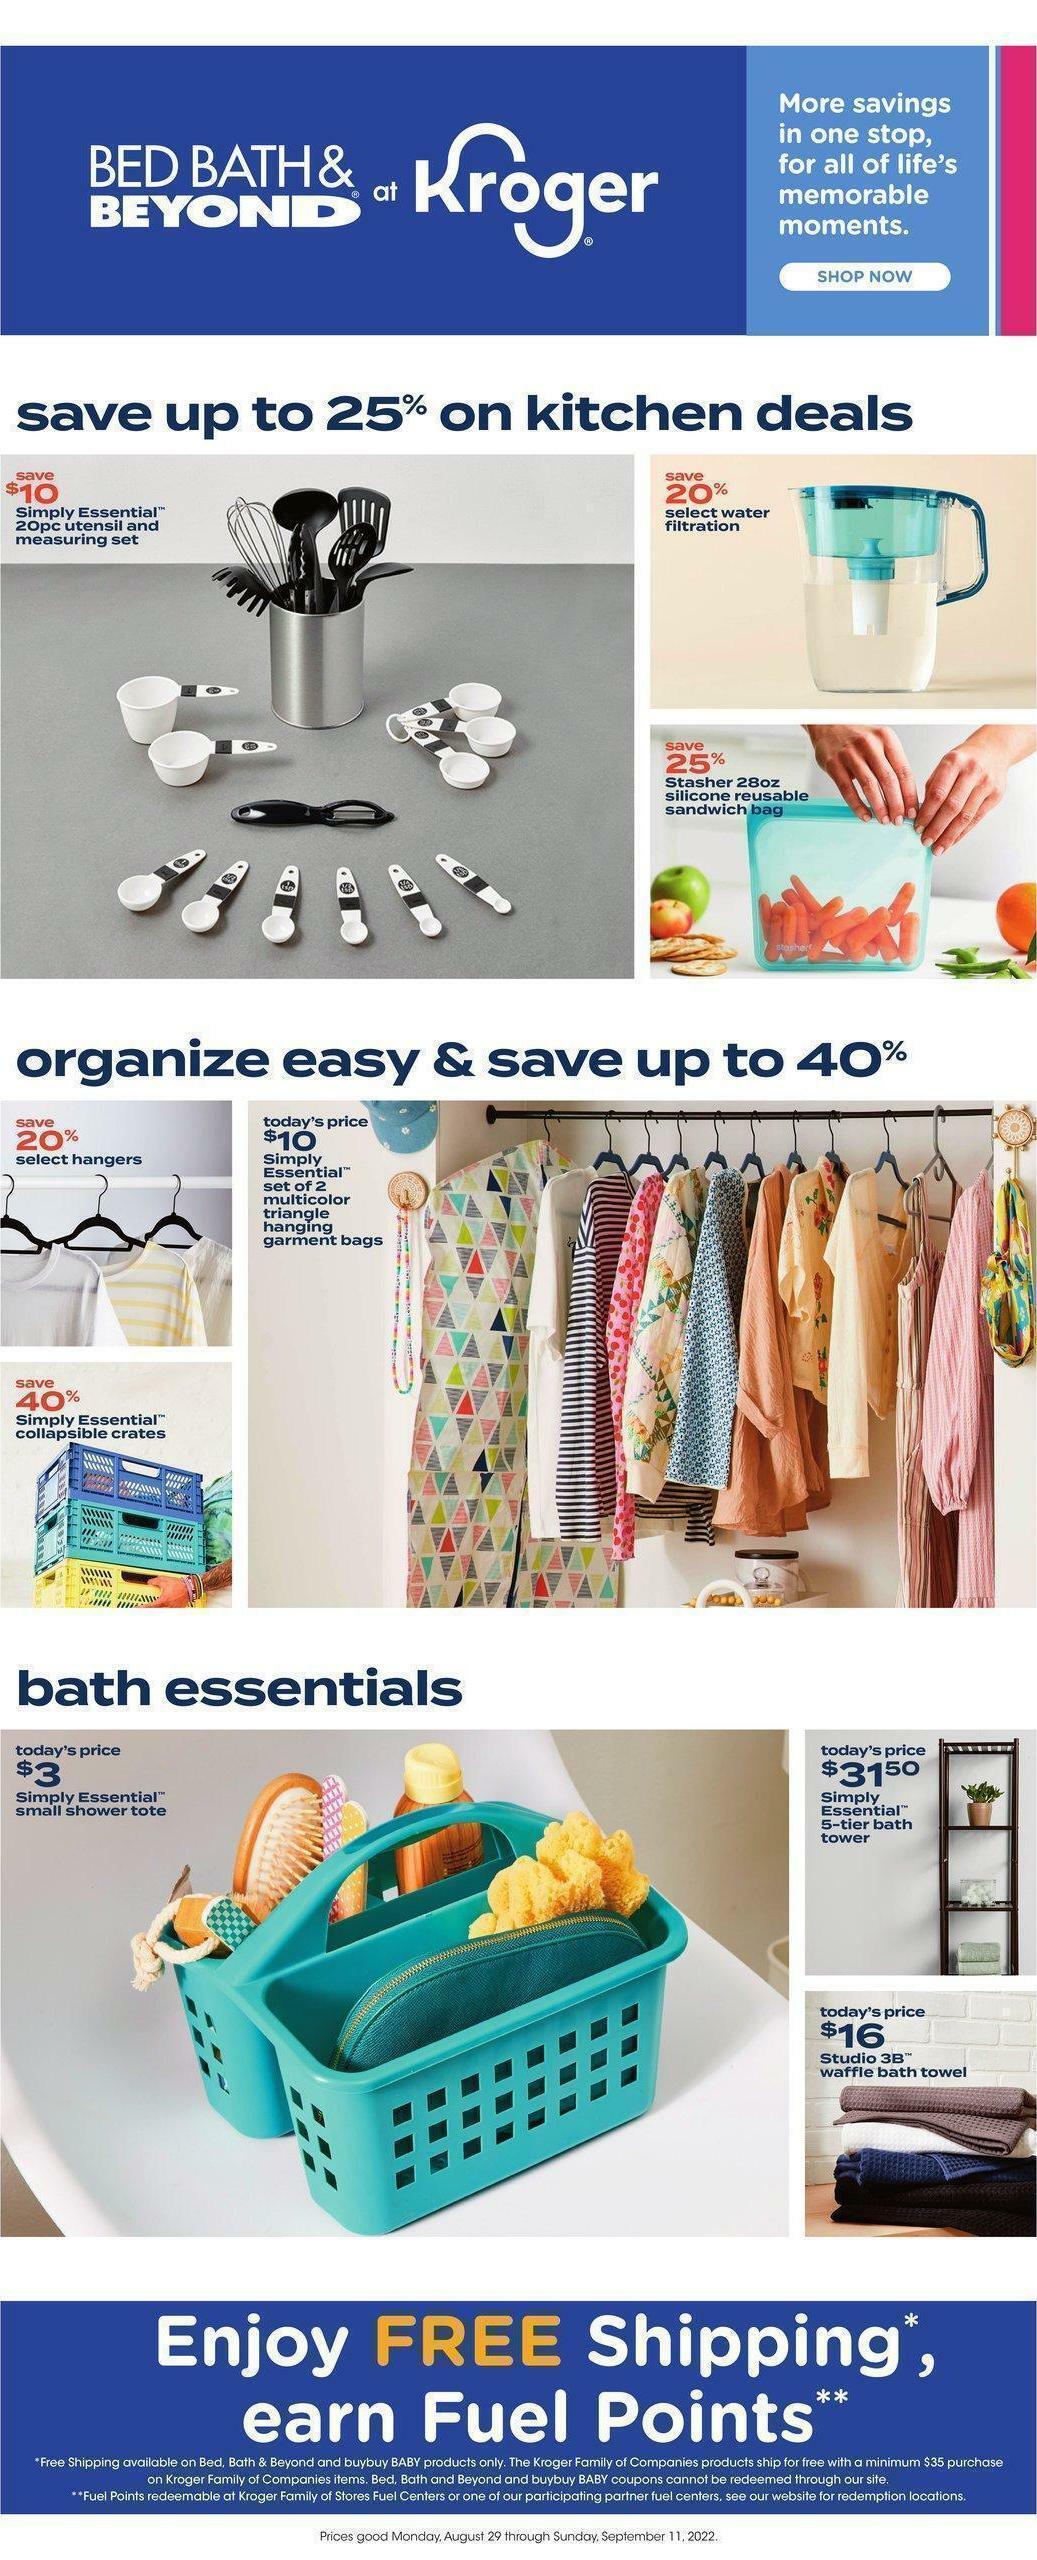 Kroger Bed, Bath & Beyond Weekly Ad from August 29